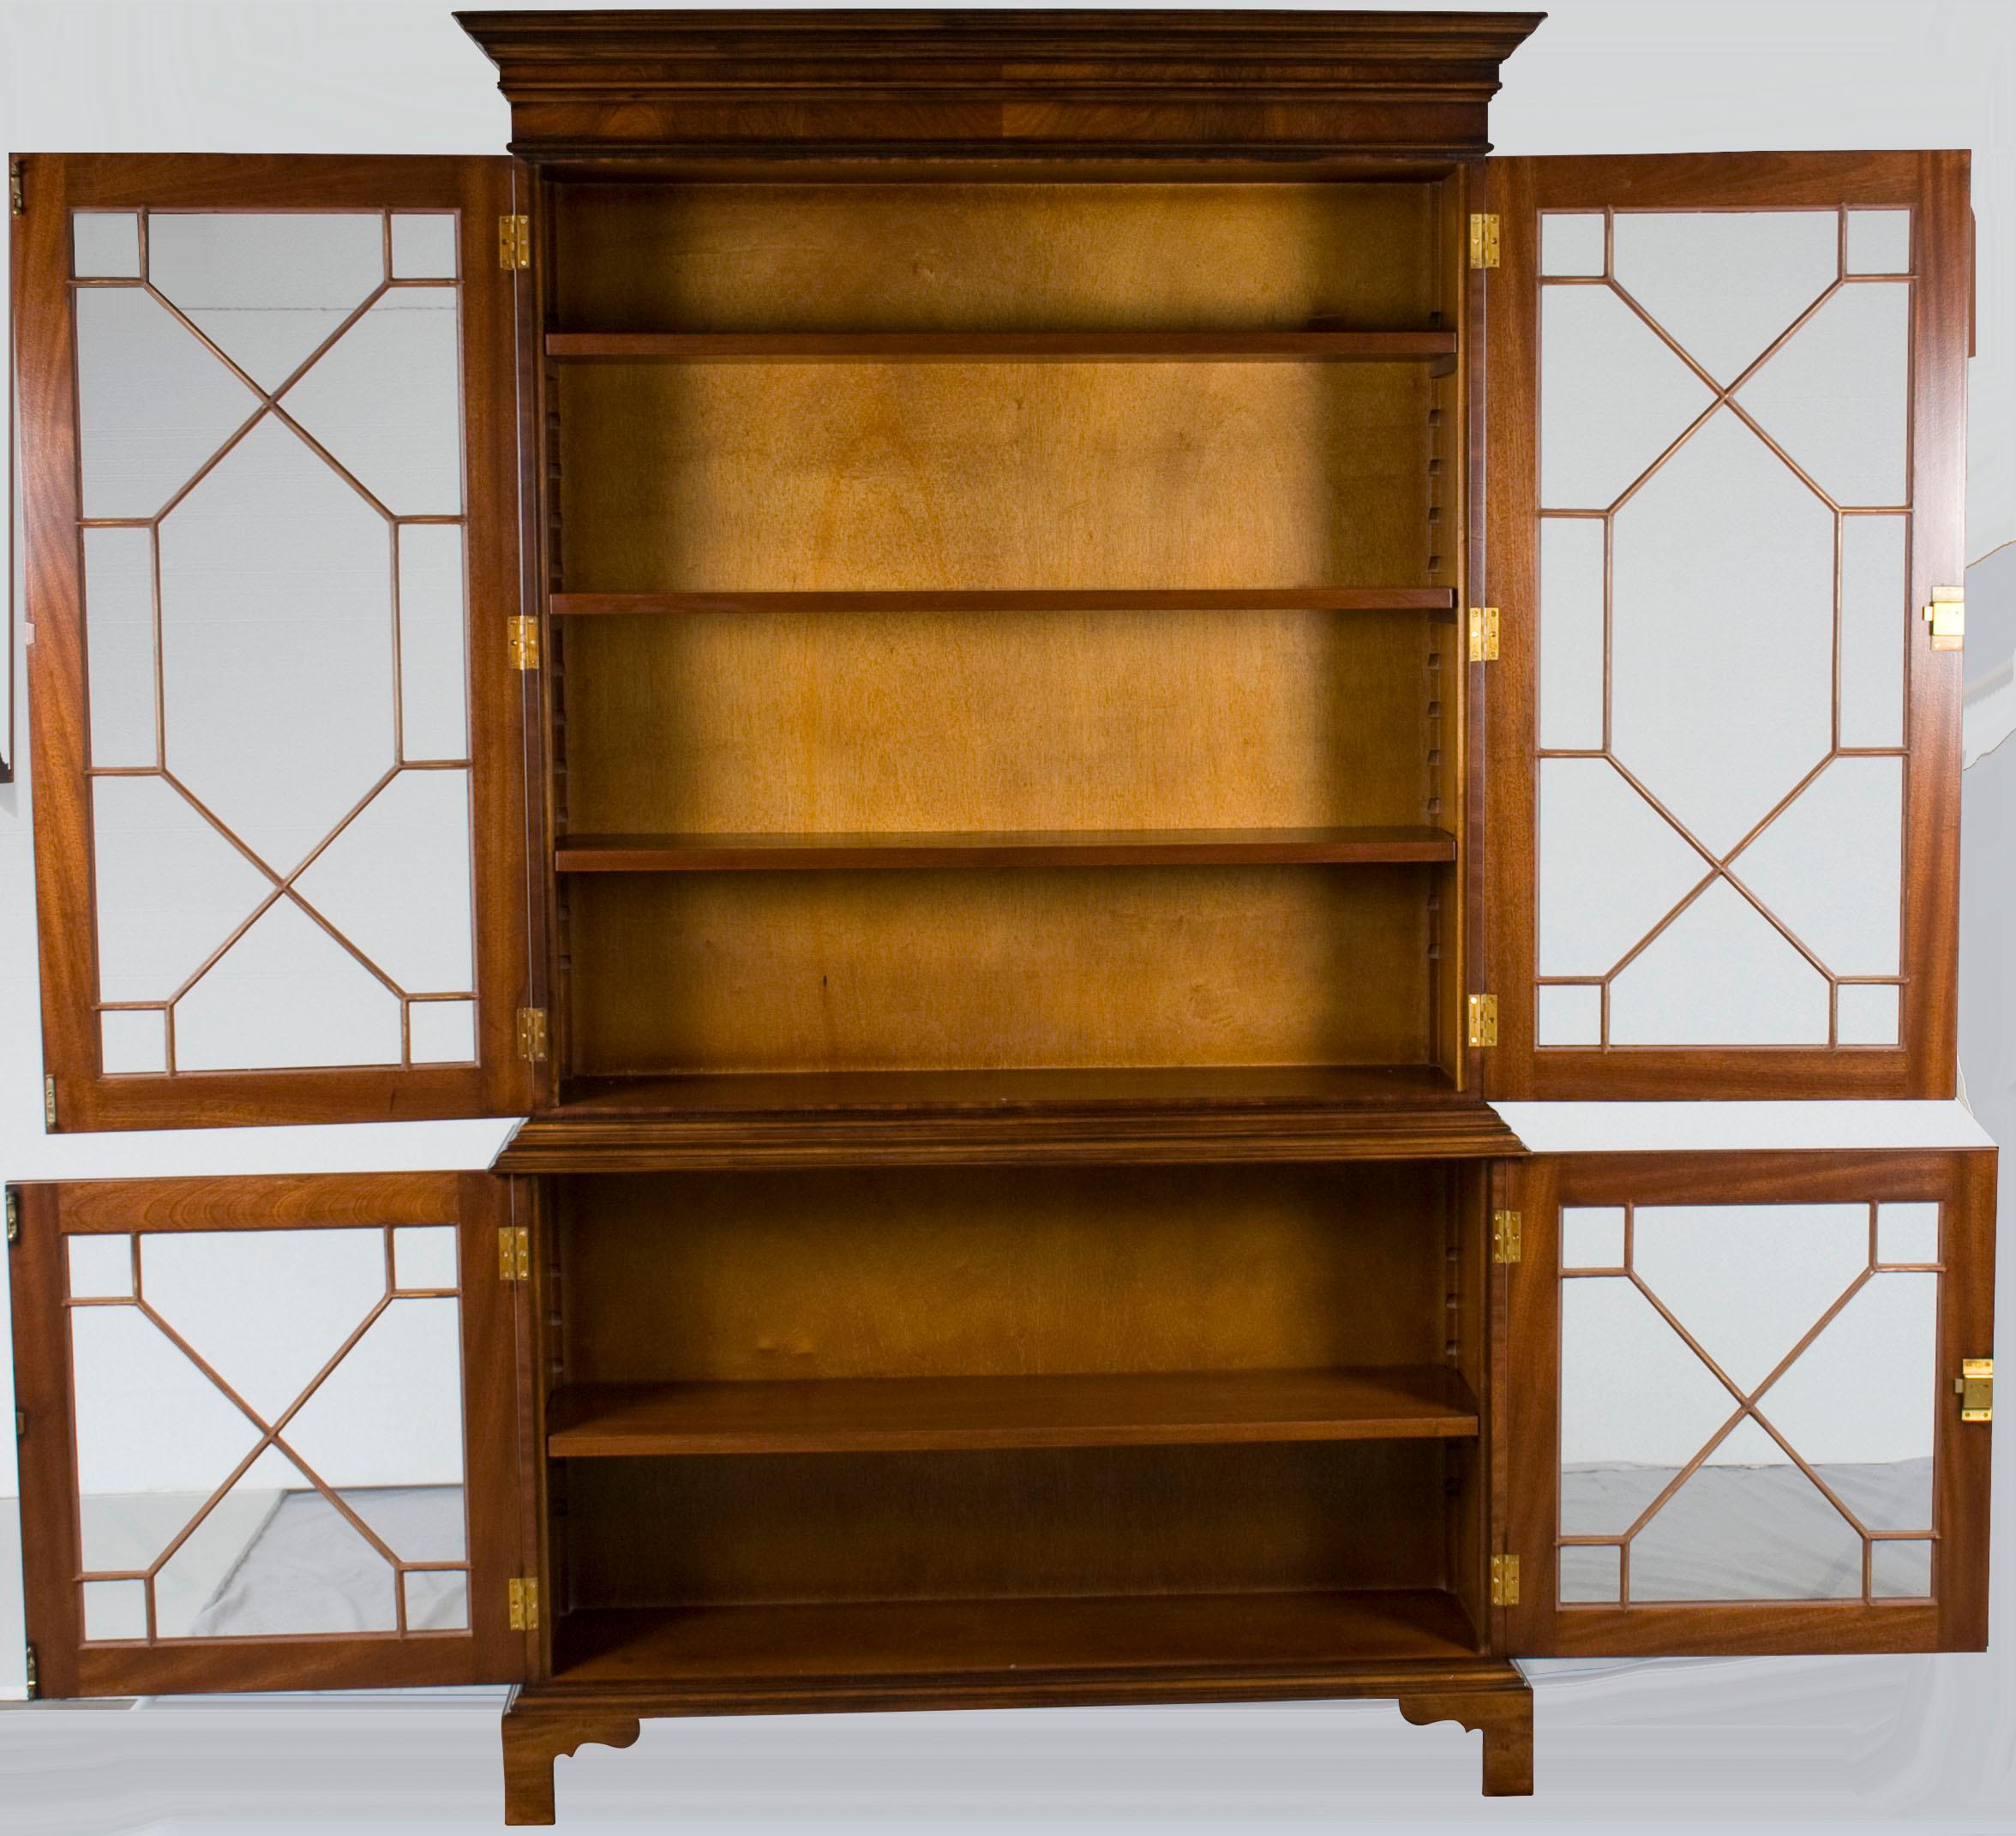 This exquisite flame mahogany astragal glass bookcase is a new reproduction handmade in England by a third-generation cabinetmaker. The astragal glass moulding sets this gorgeous bookcase apart, giving it a classy look that, when combined with the